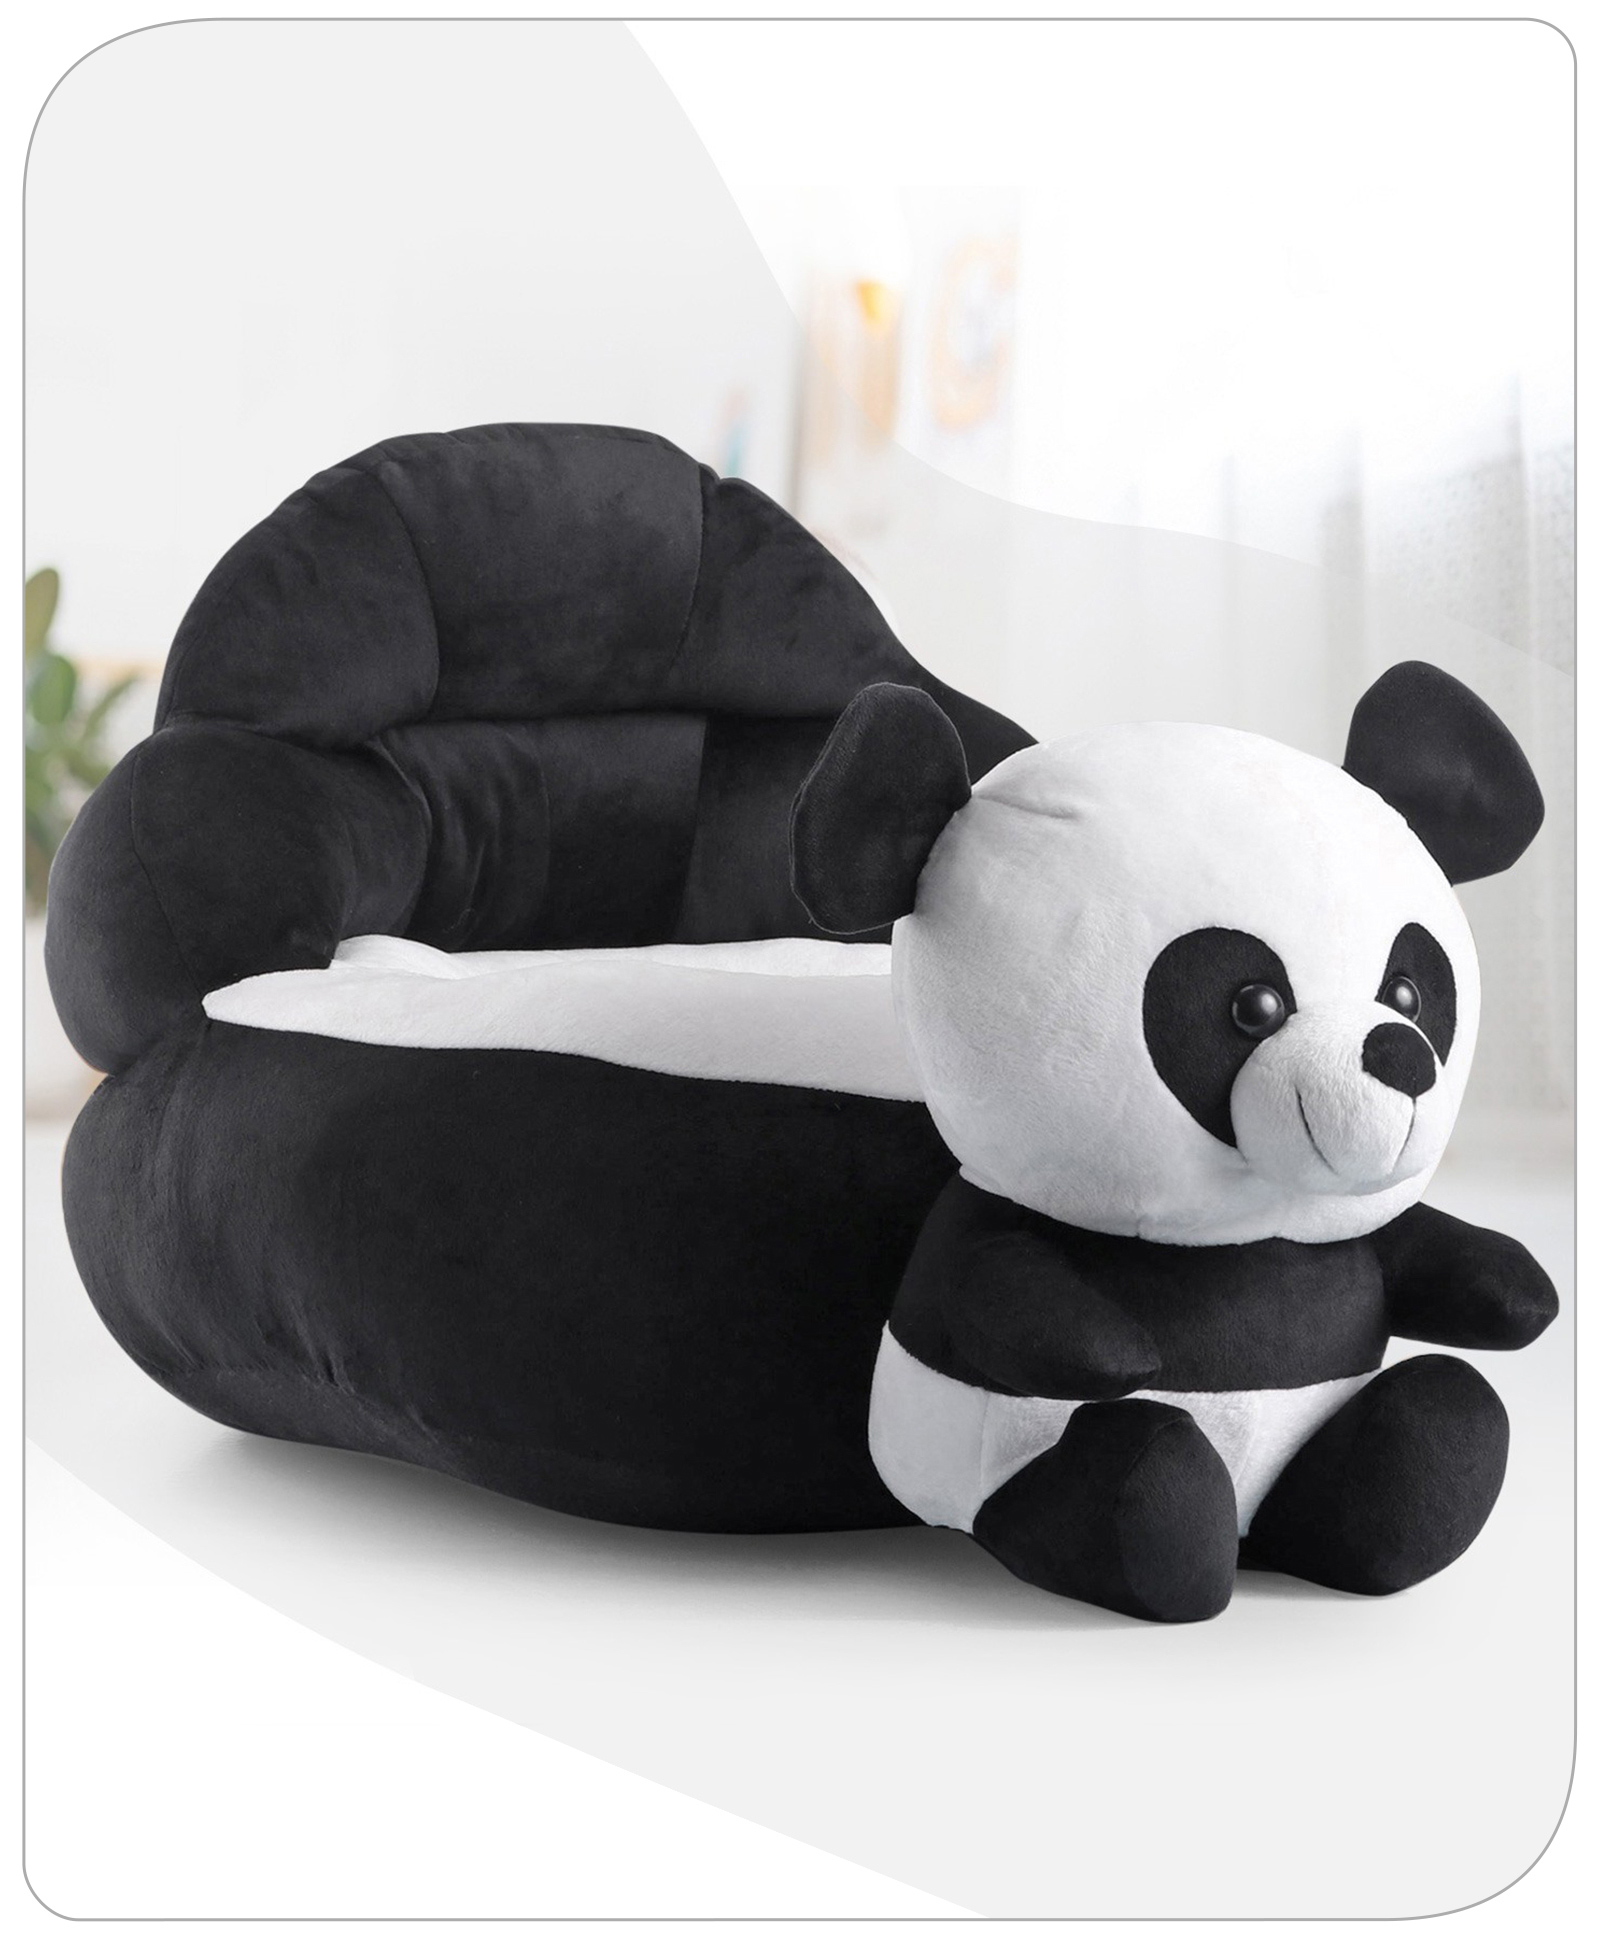 kijken Pakistan Het hotel Babyhug Panda Shaped Soft Seat - Black And White Online in India, Buy at  Best Price from FirstCry.com - 9203010